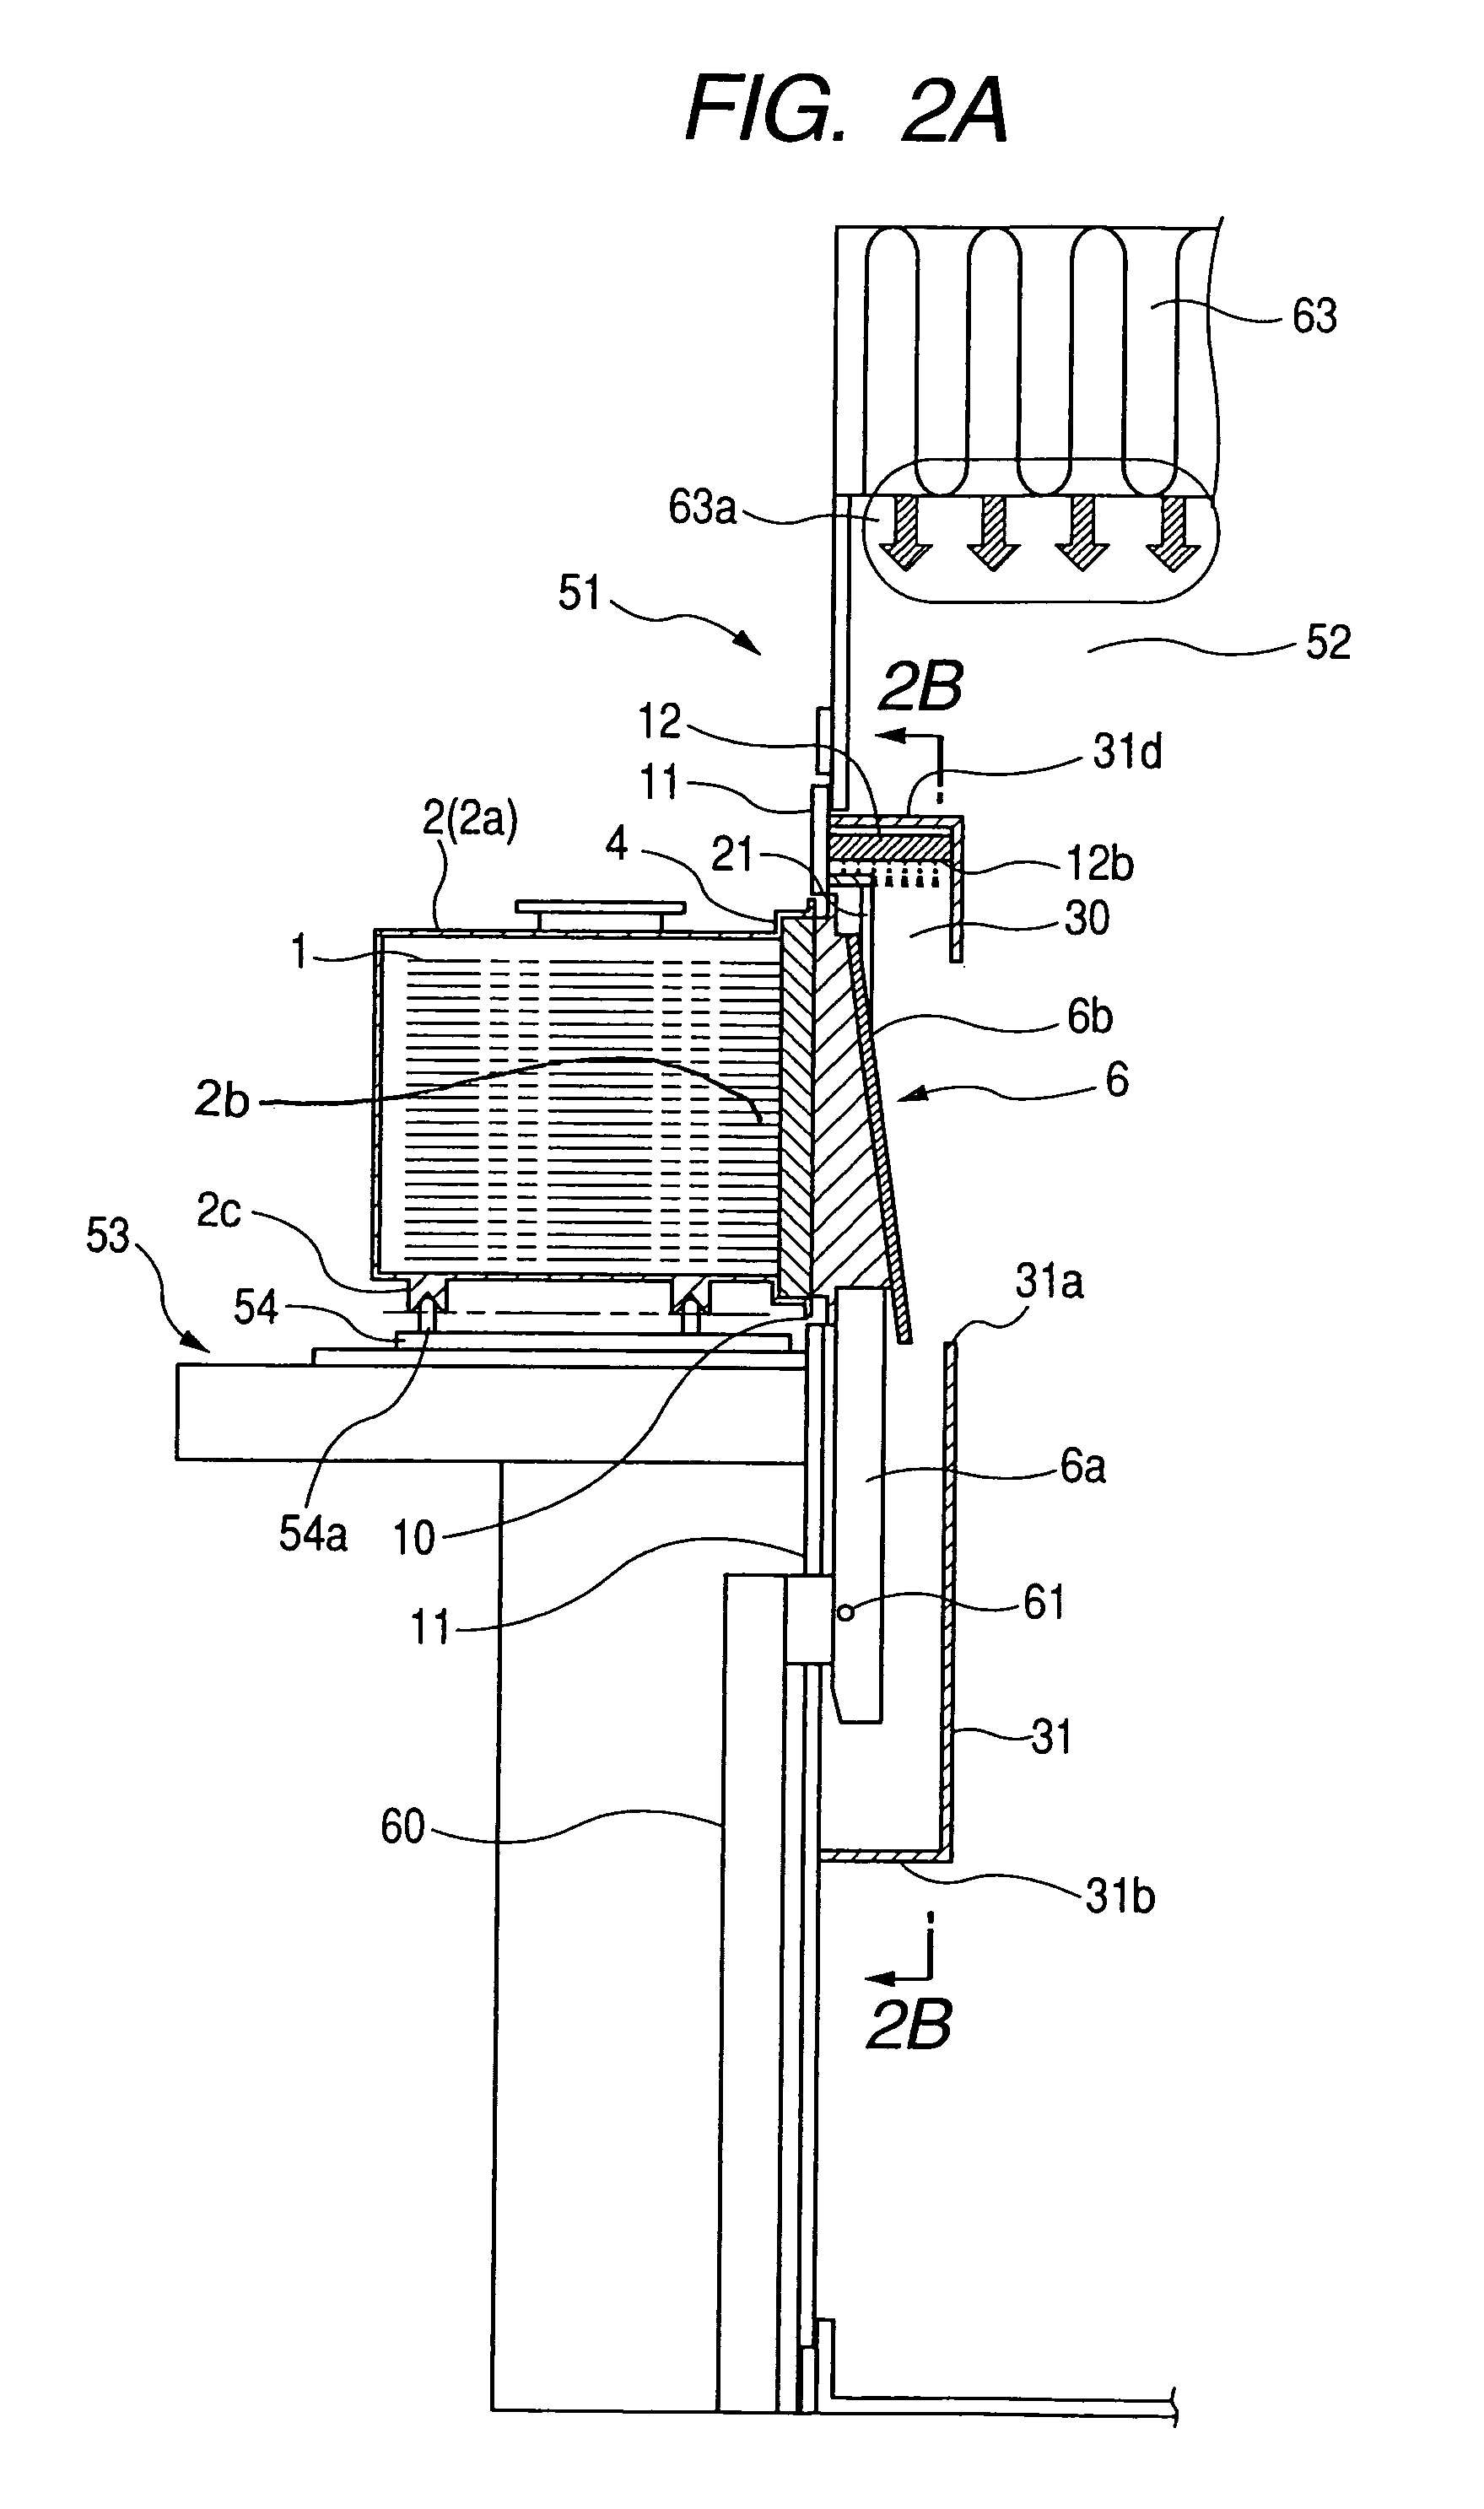 Lid opening/closing system for closed container and substrate processing method using same